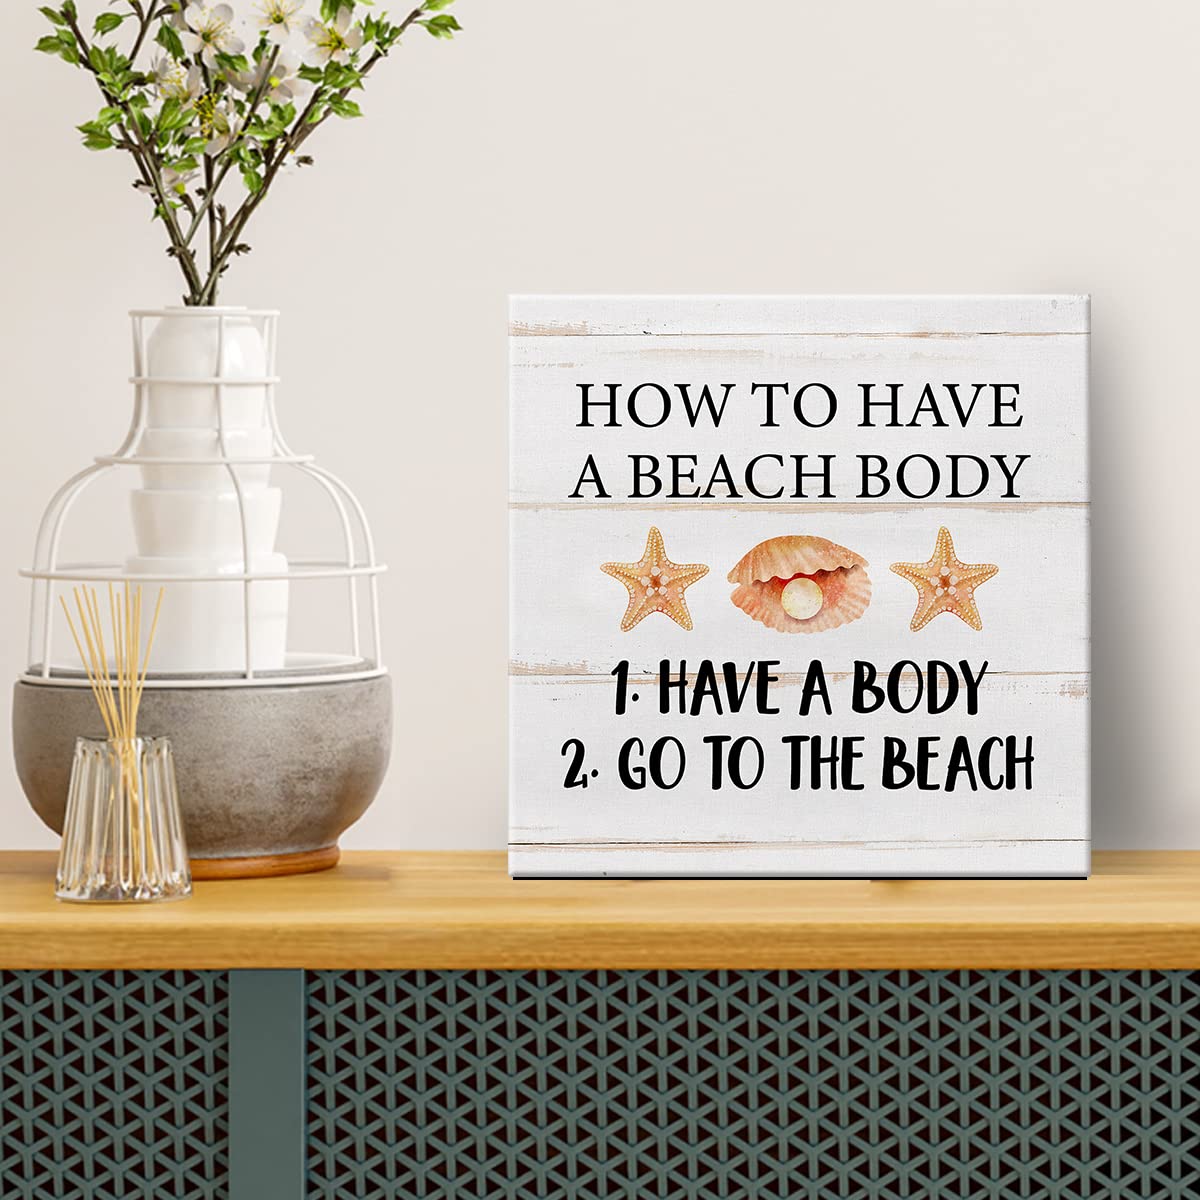 Rustic How to Have a Beach Body Canvas Prints Wall Art Decor Beach Poster Painting Framed Artwork Seaside Desk Signs Farmhouse Home Shelf Wall Decoration 8 x 8 Inch